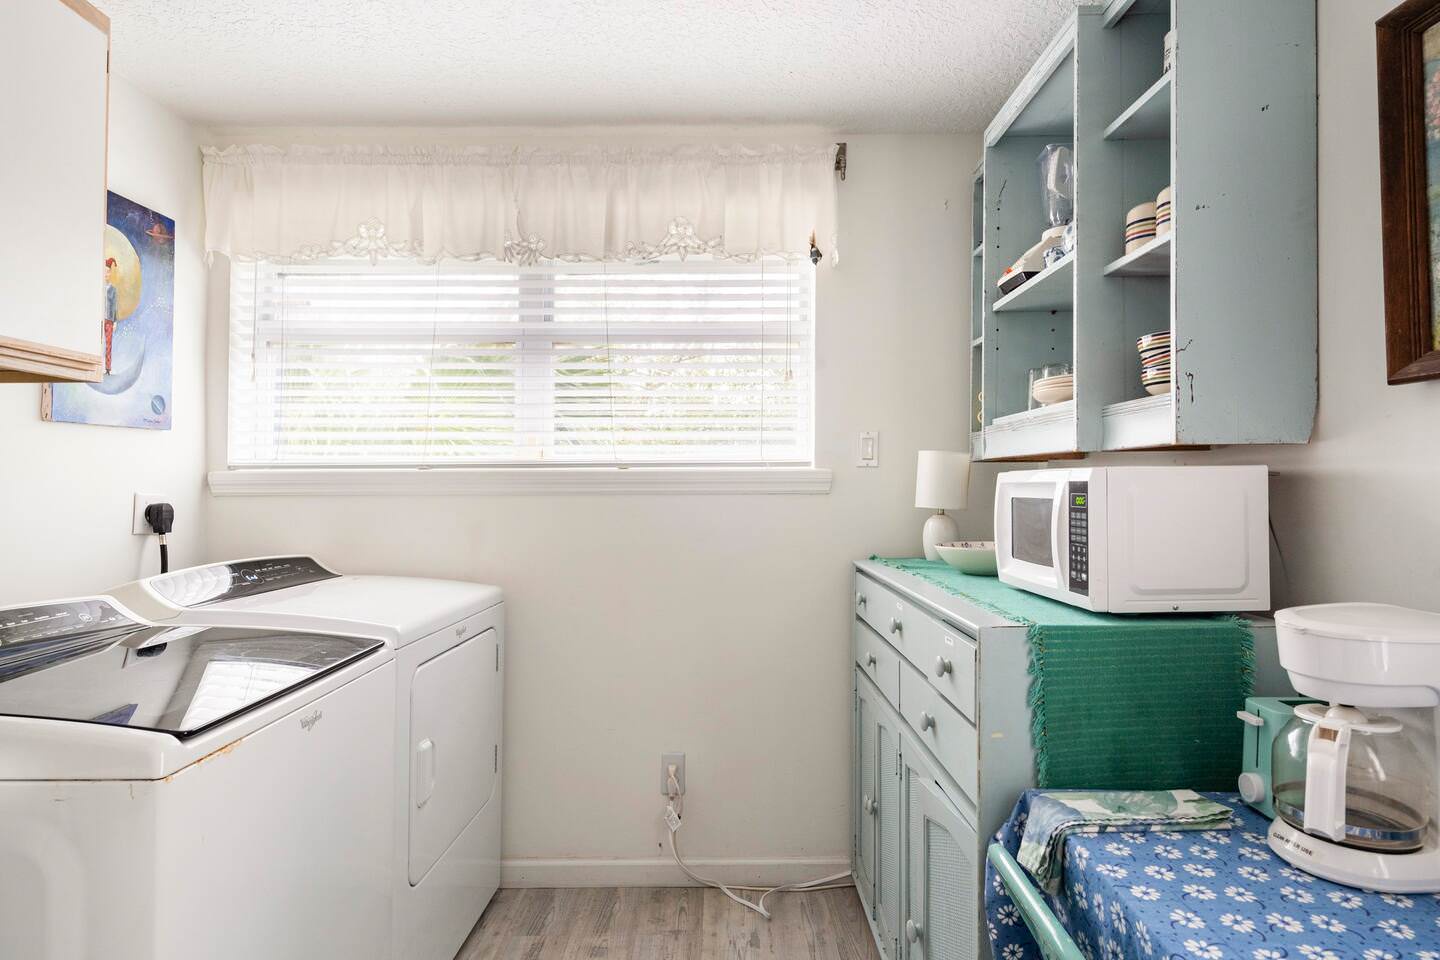 Laundry room in the home